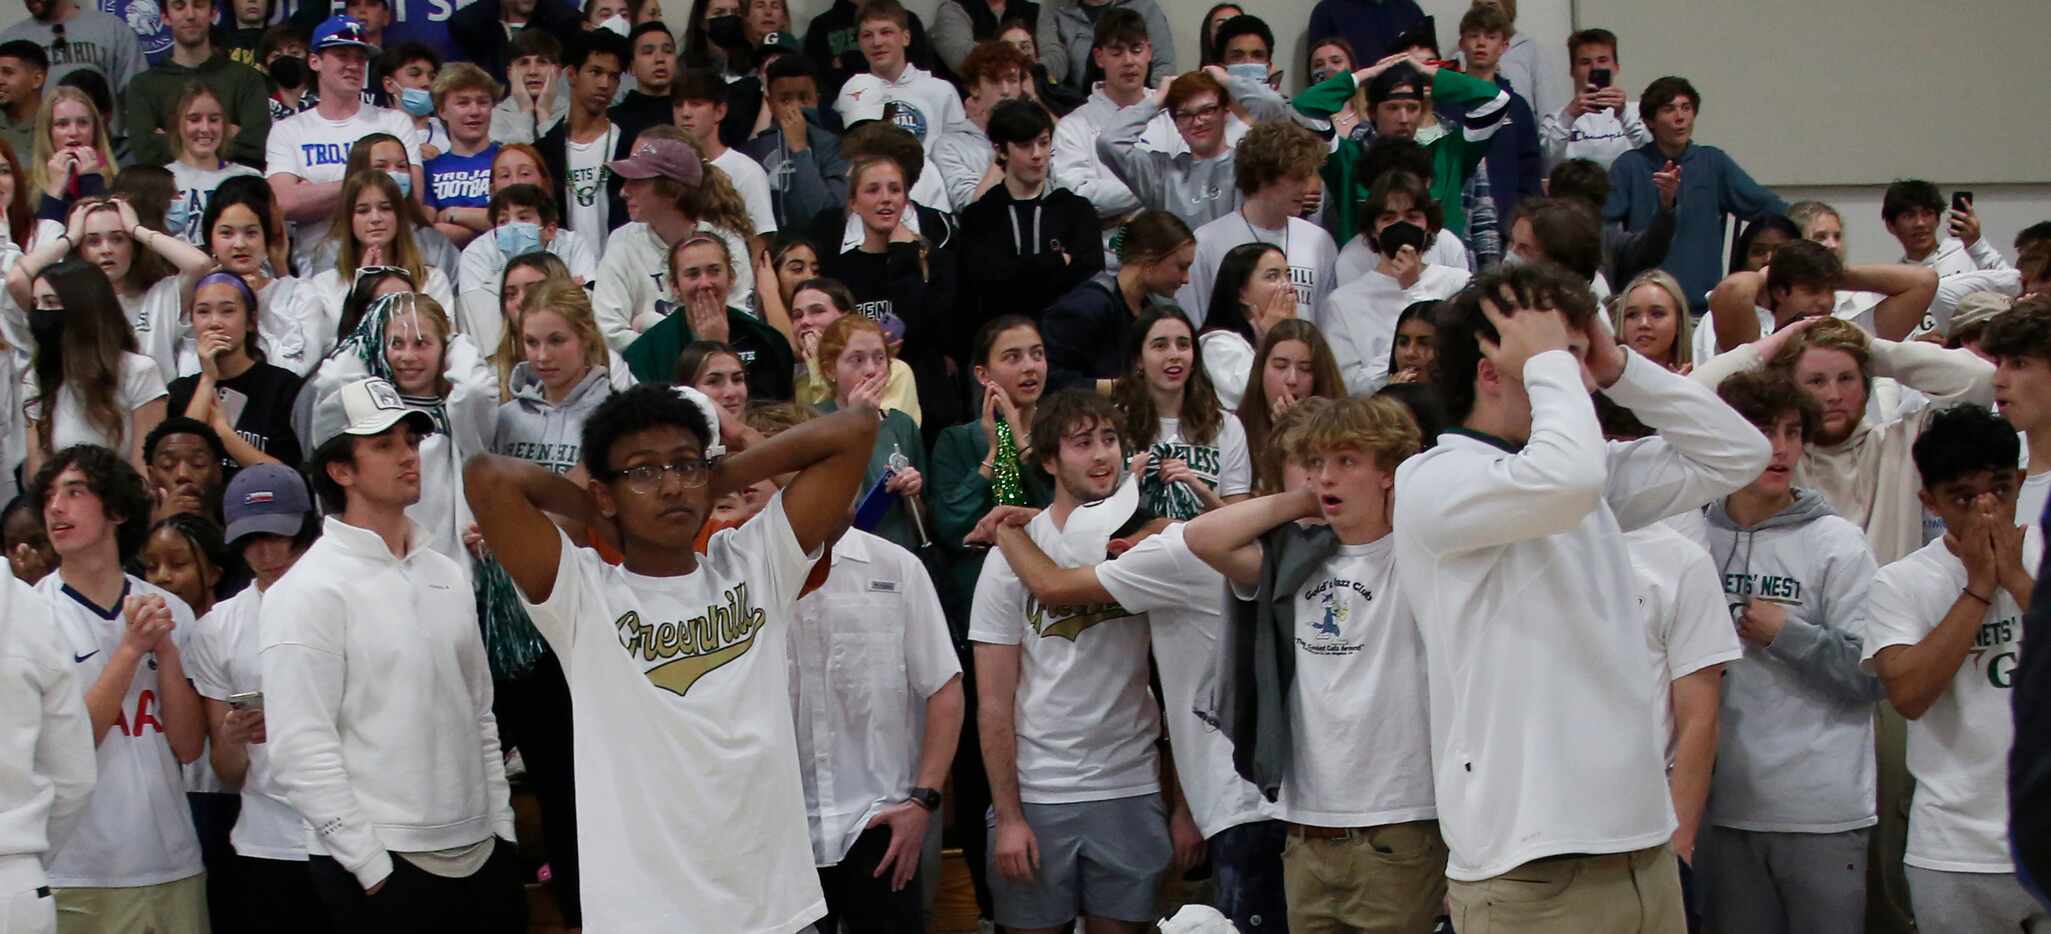 Greenhill fans filling the student section react in shock after a buzzer beater by Houston...